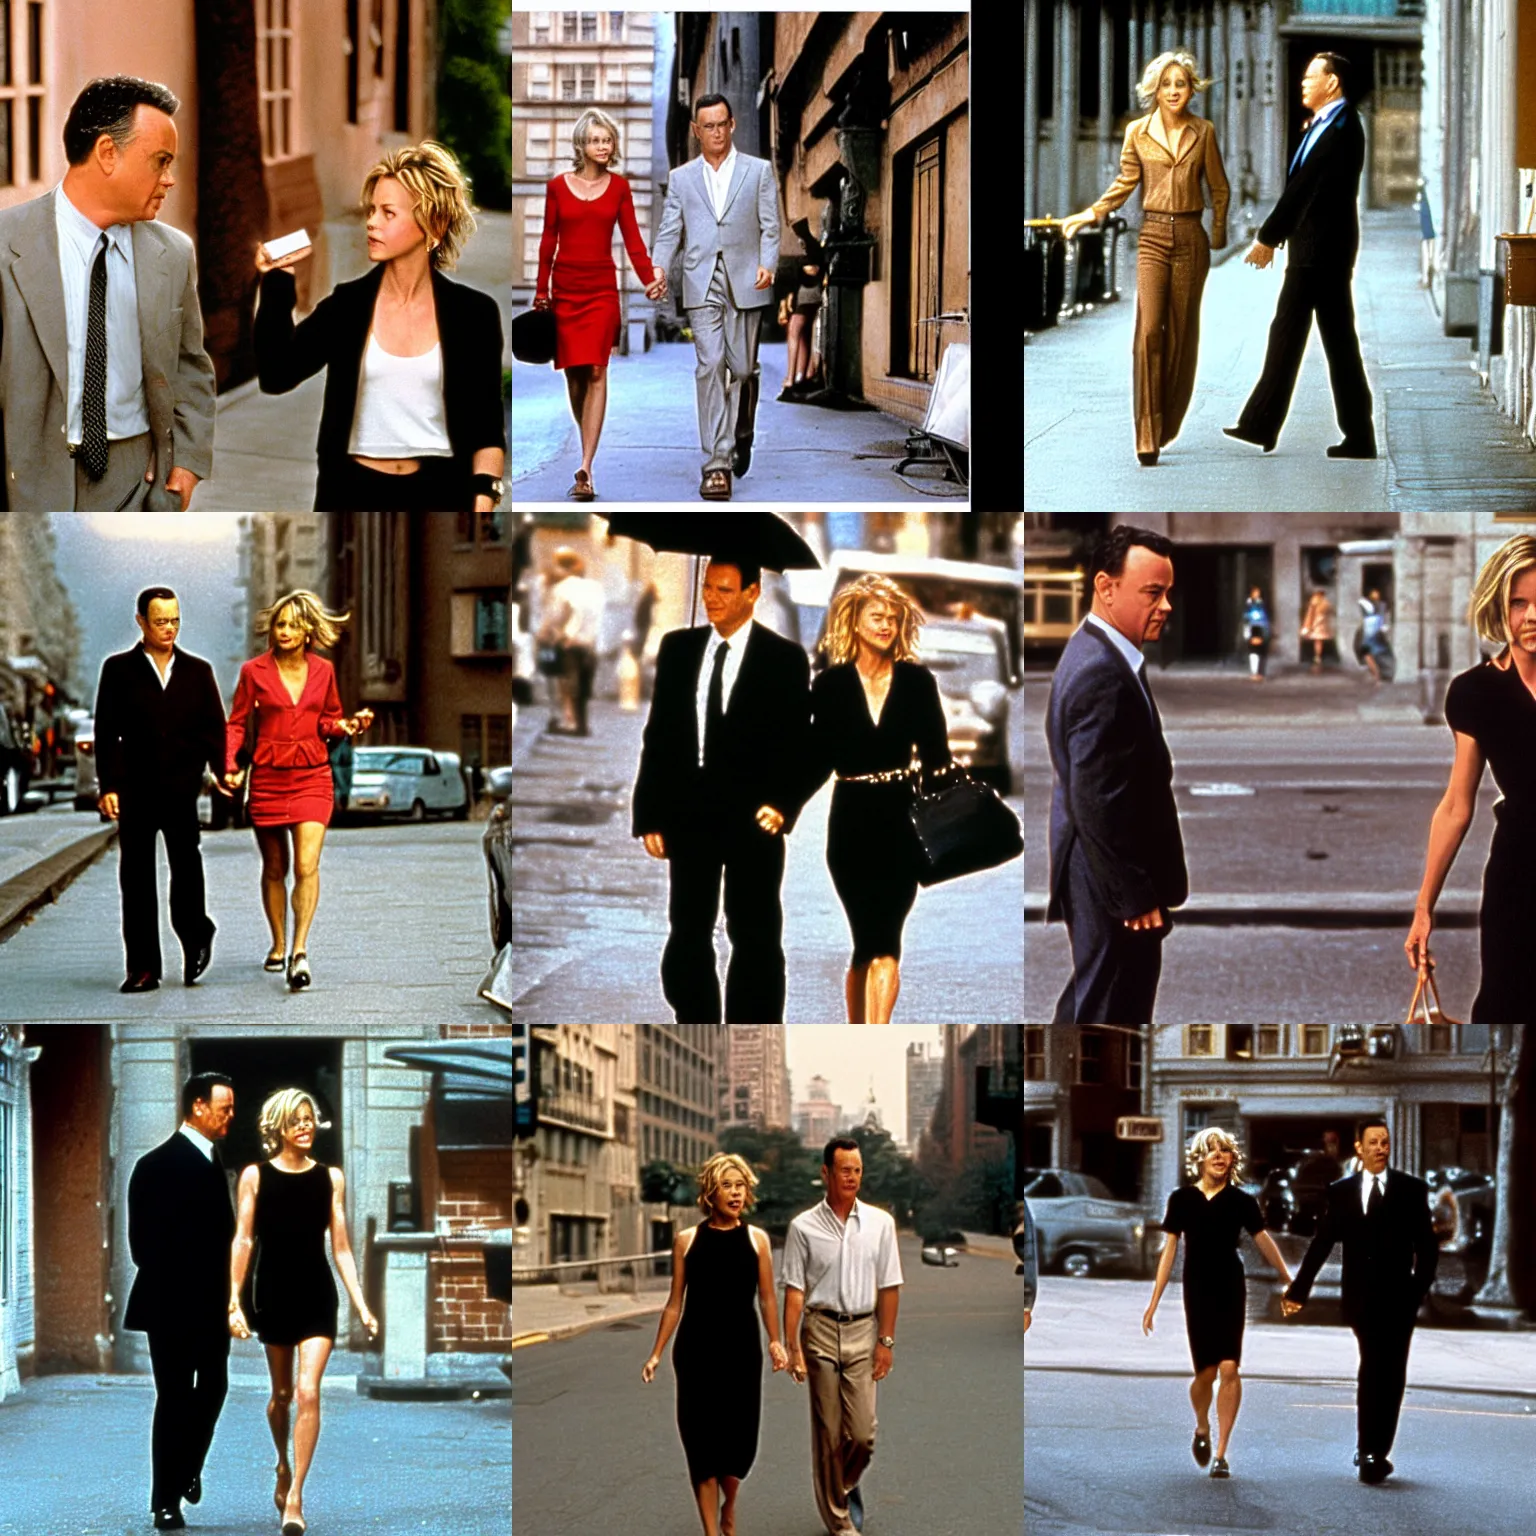 Prompt: A scene from You've got mail with Meg Ryan and Tom Hanks walking in the style of Helmut Newton